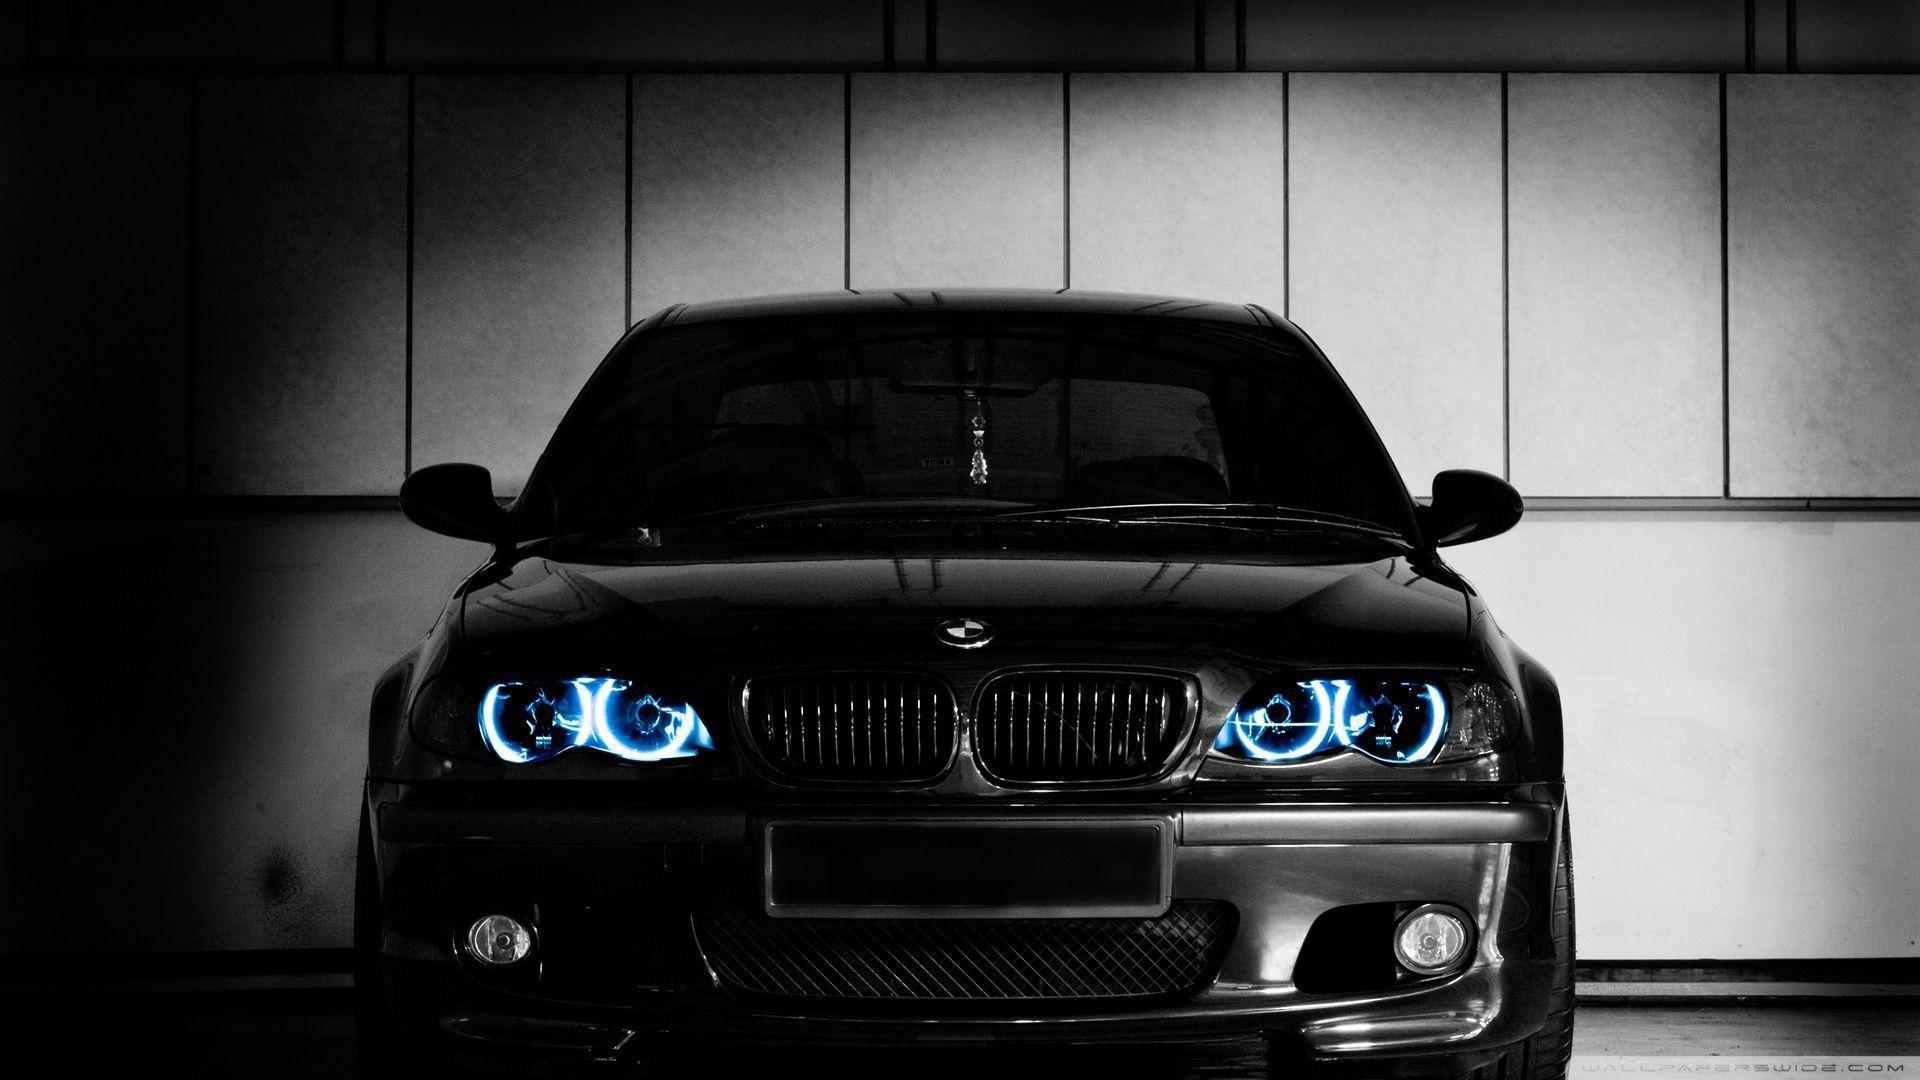 Bmw Wallpapers 1920x1080 Wallpaper Cave